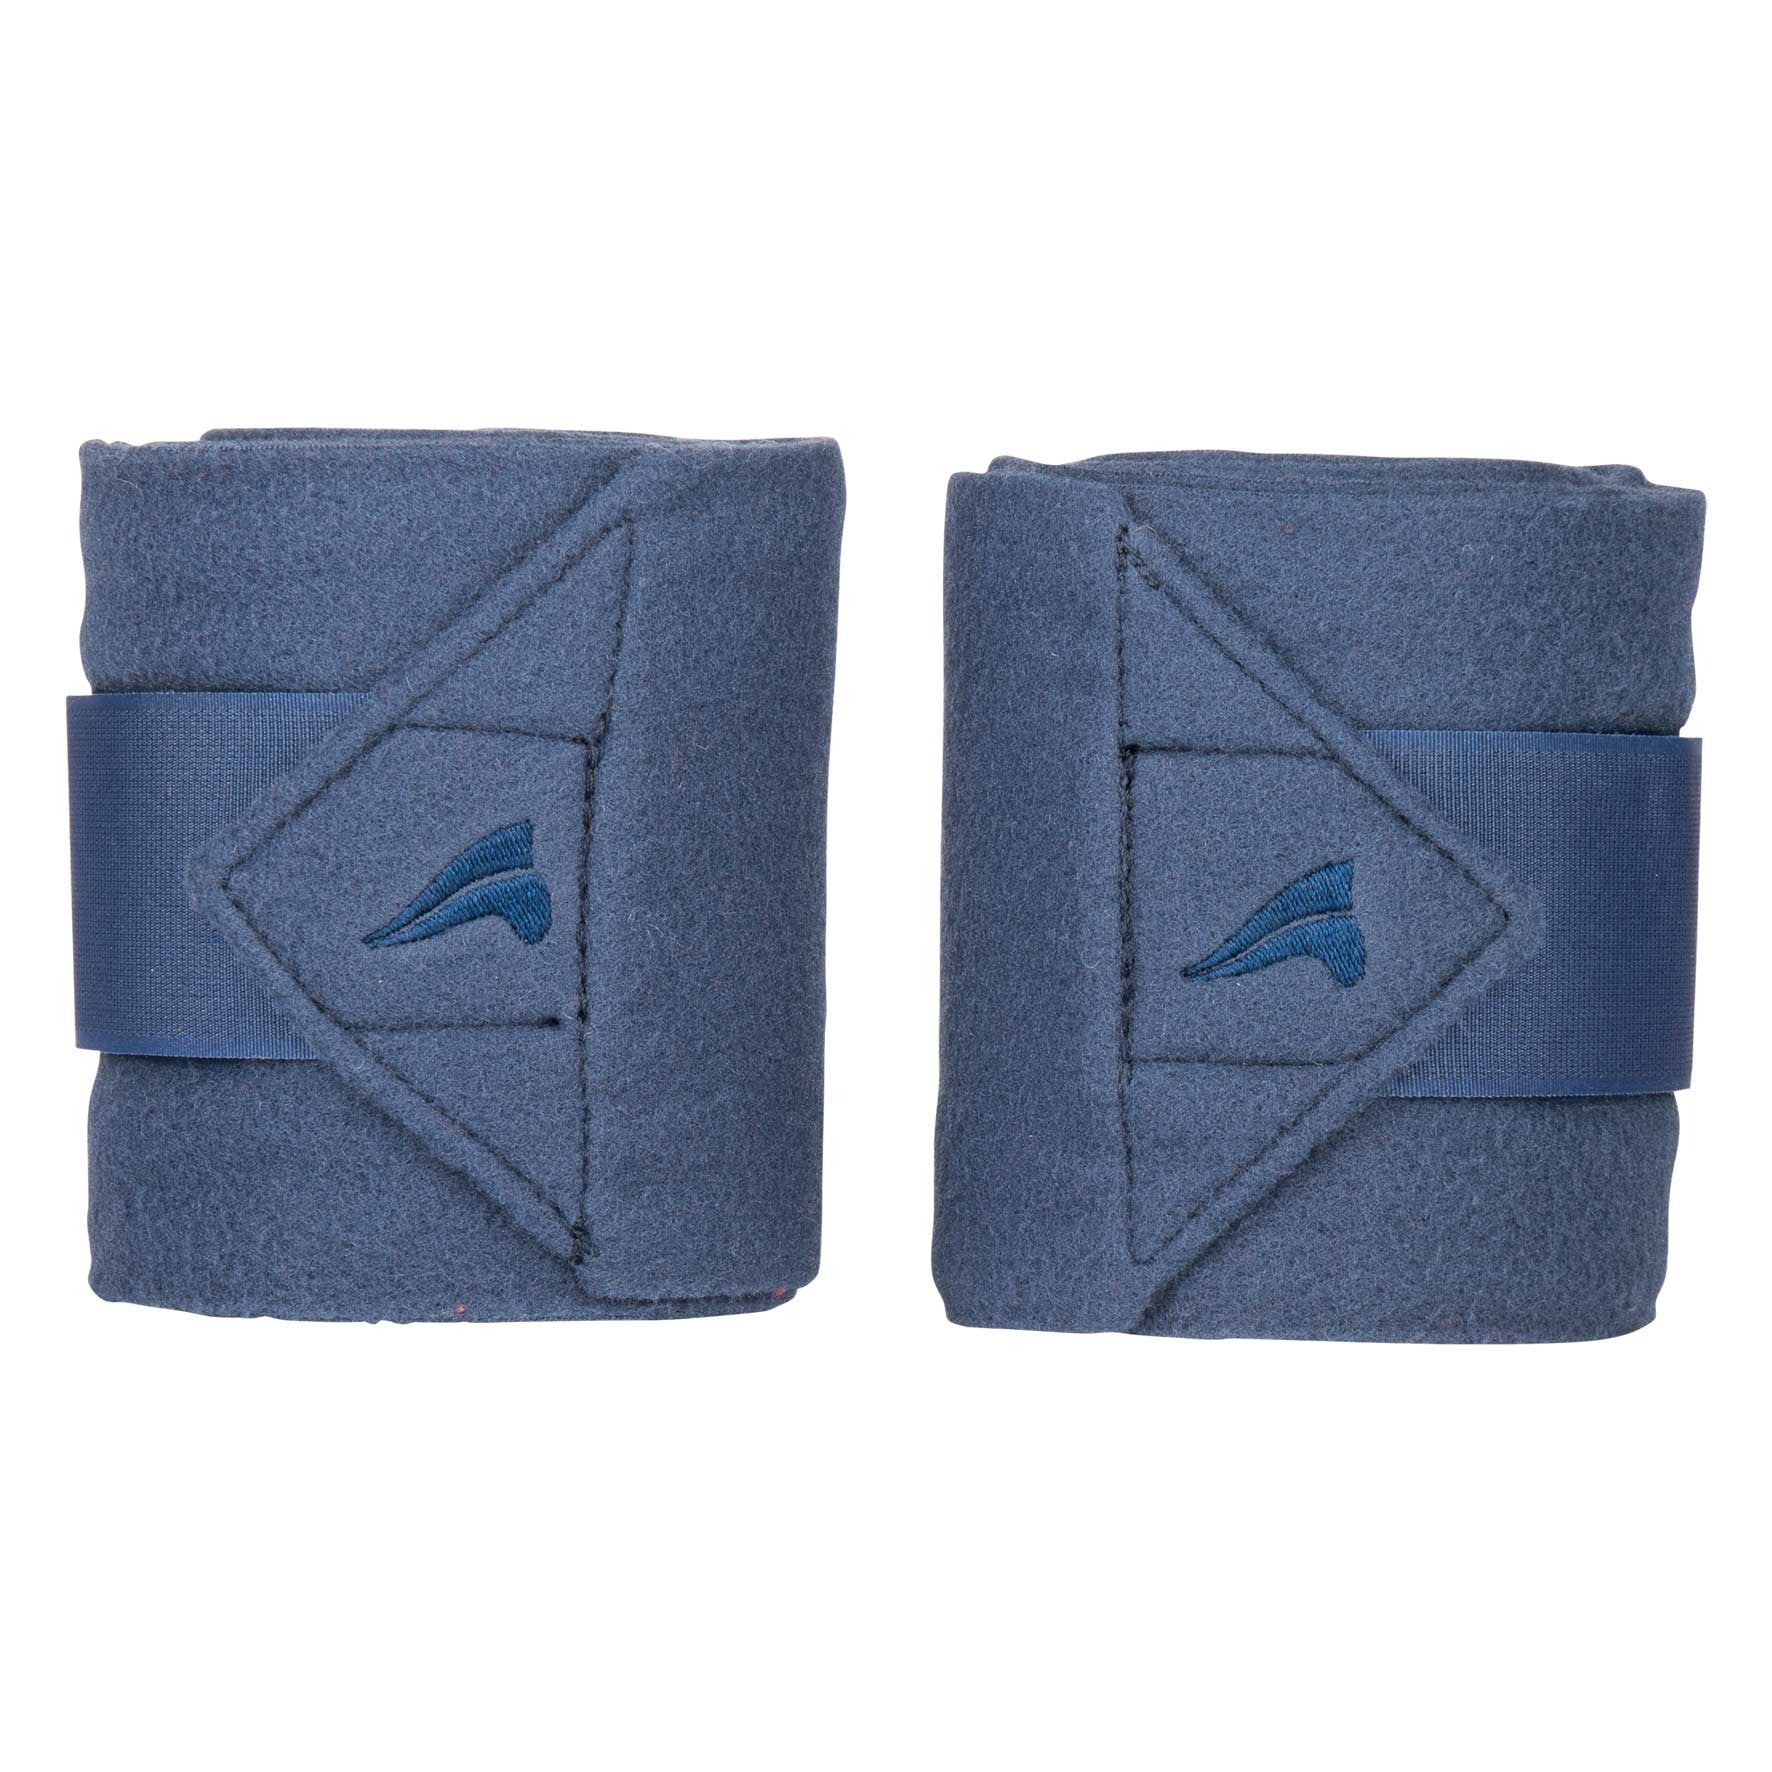 Euro-star AW16 Fleece Bandages - All colours - | Divine Equestrian